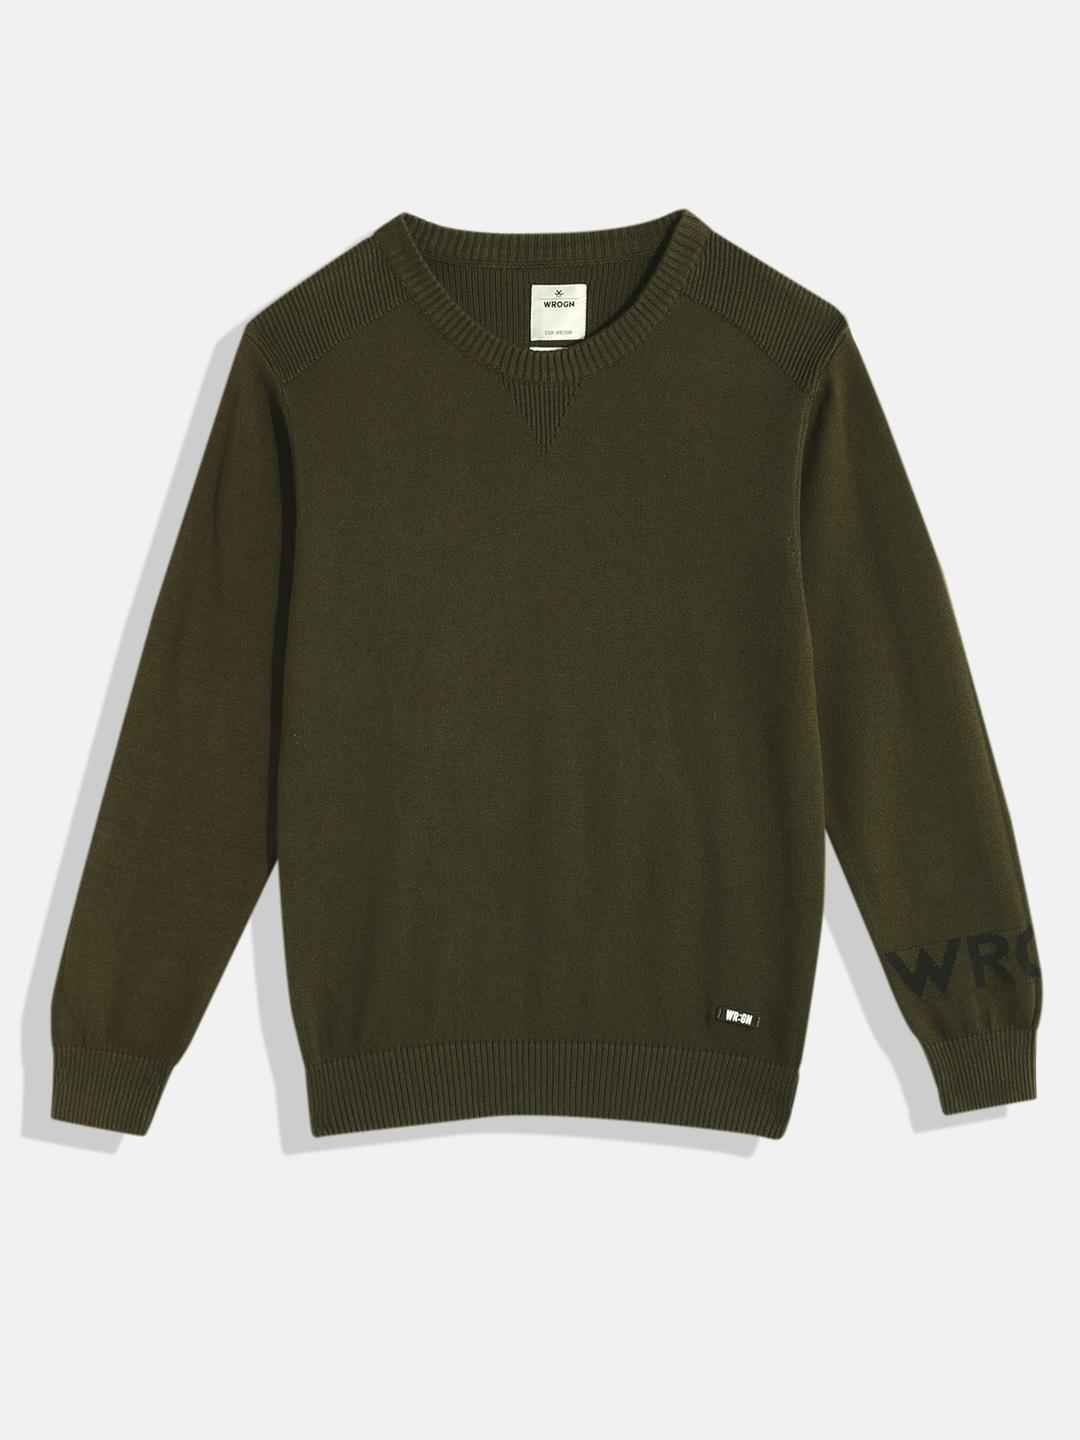 wrogn youth boys olive green pullover